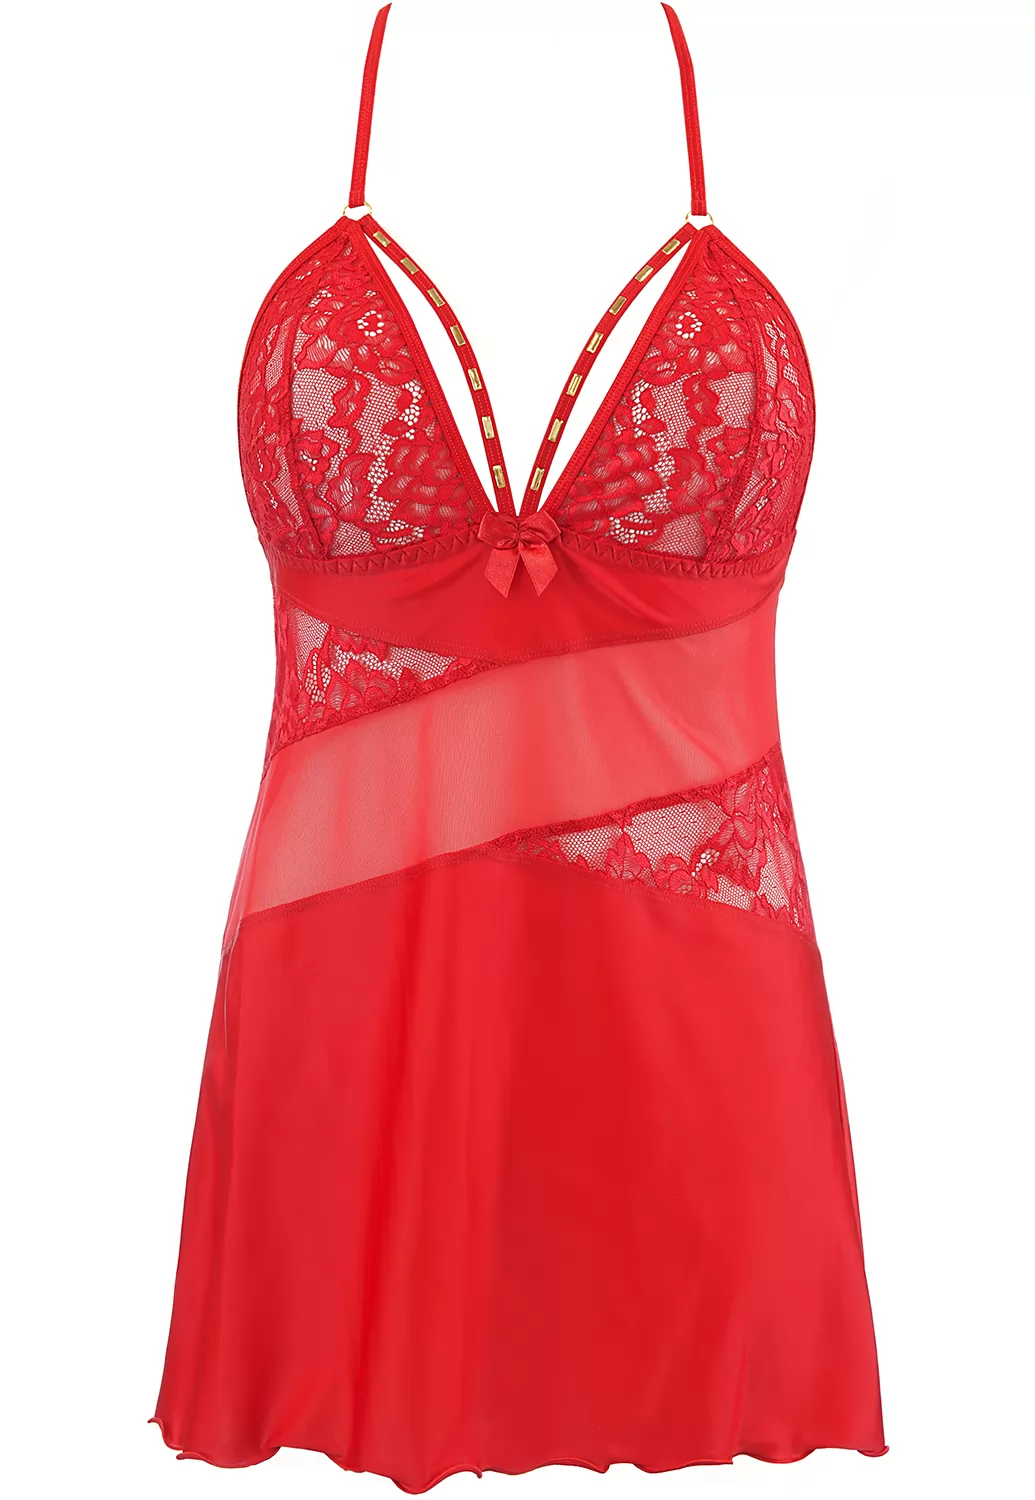 Red microfiber lace Chemise and thong